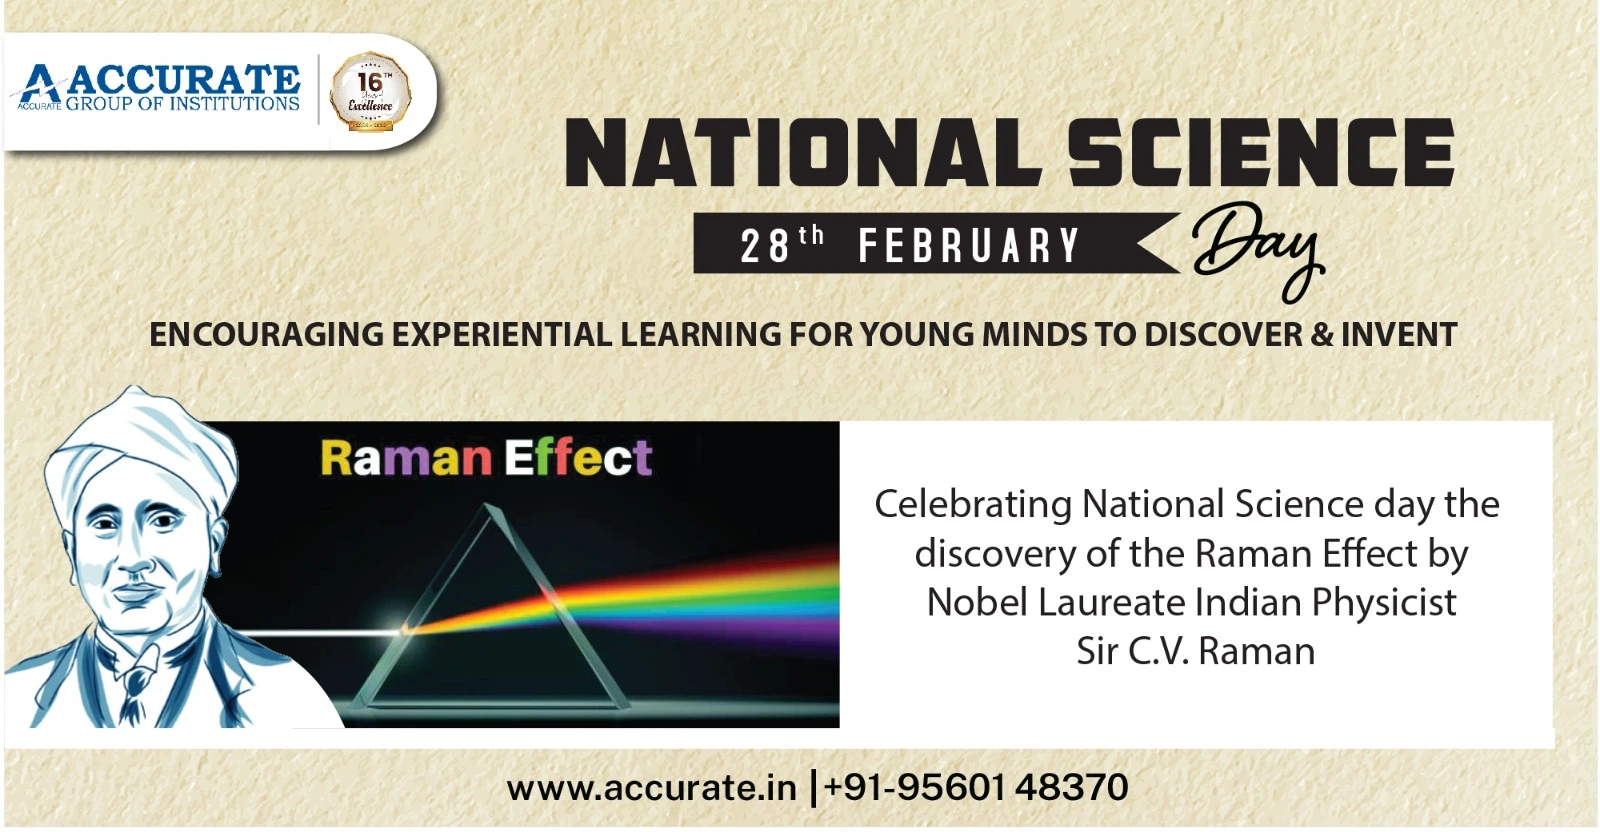 Accurate Celebrating National Science Day 28th Feb